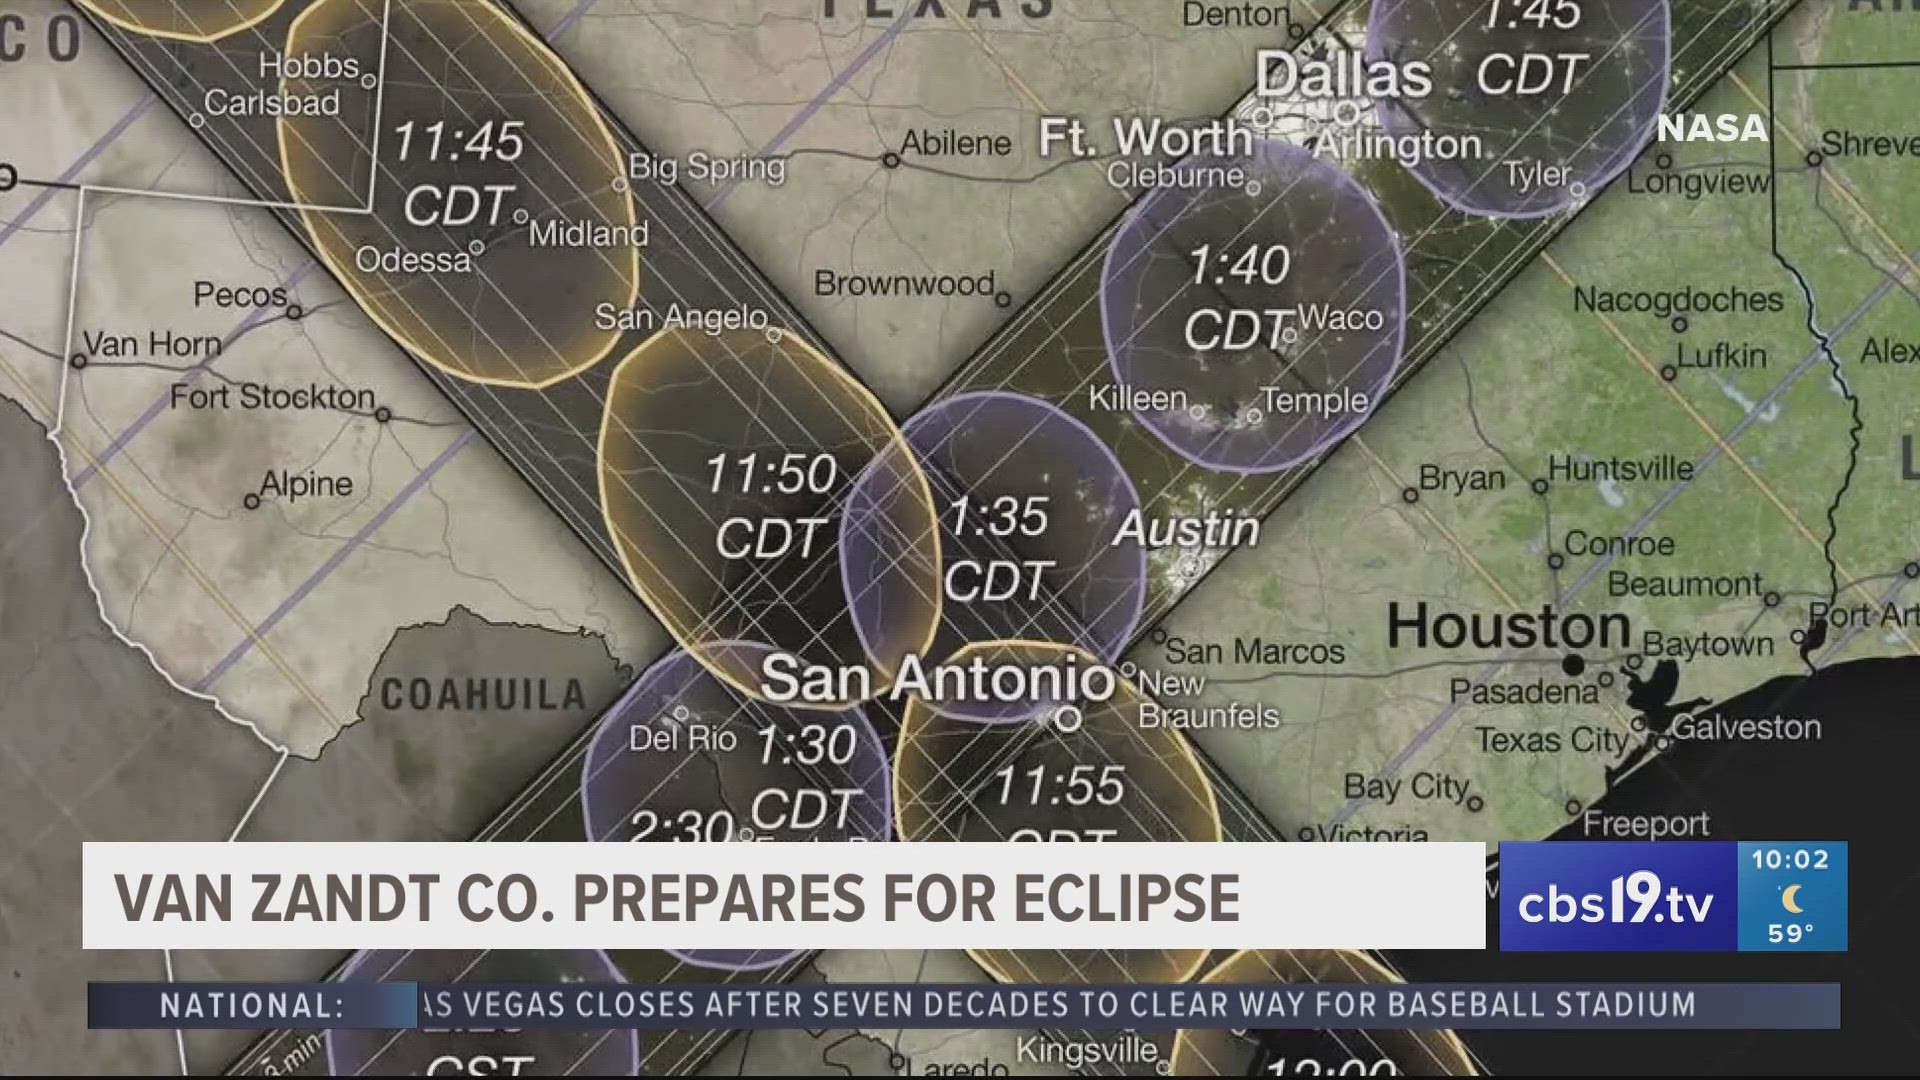 East Texas county, cell service providers make preparations ahead of total solar eclipse